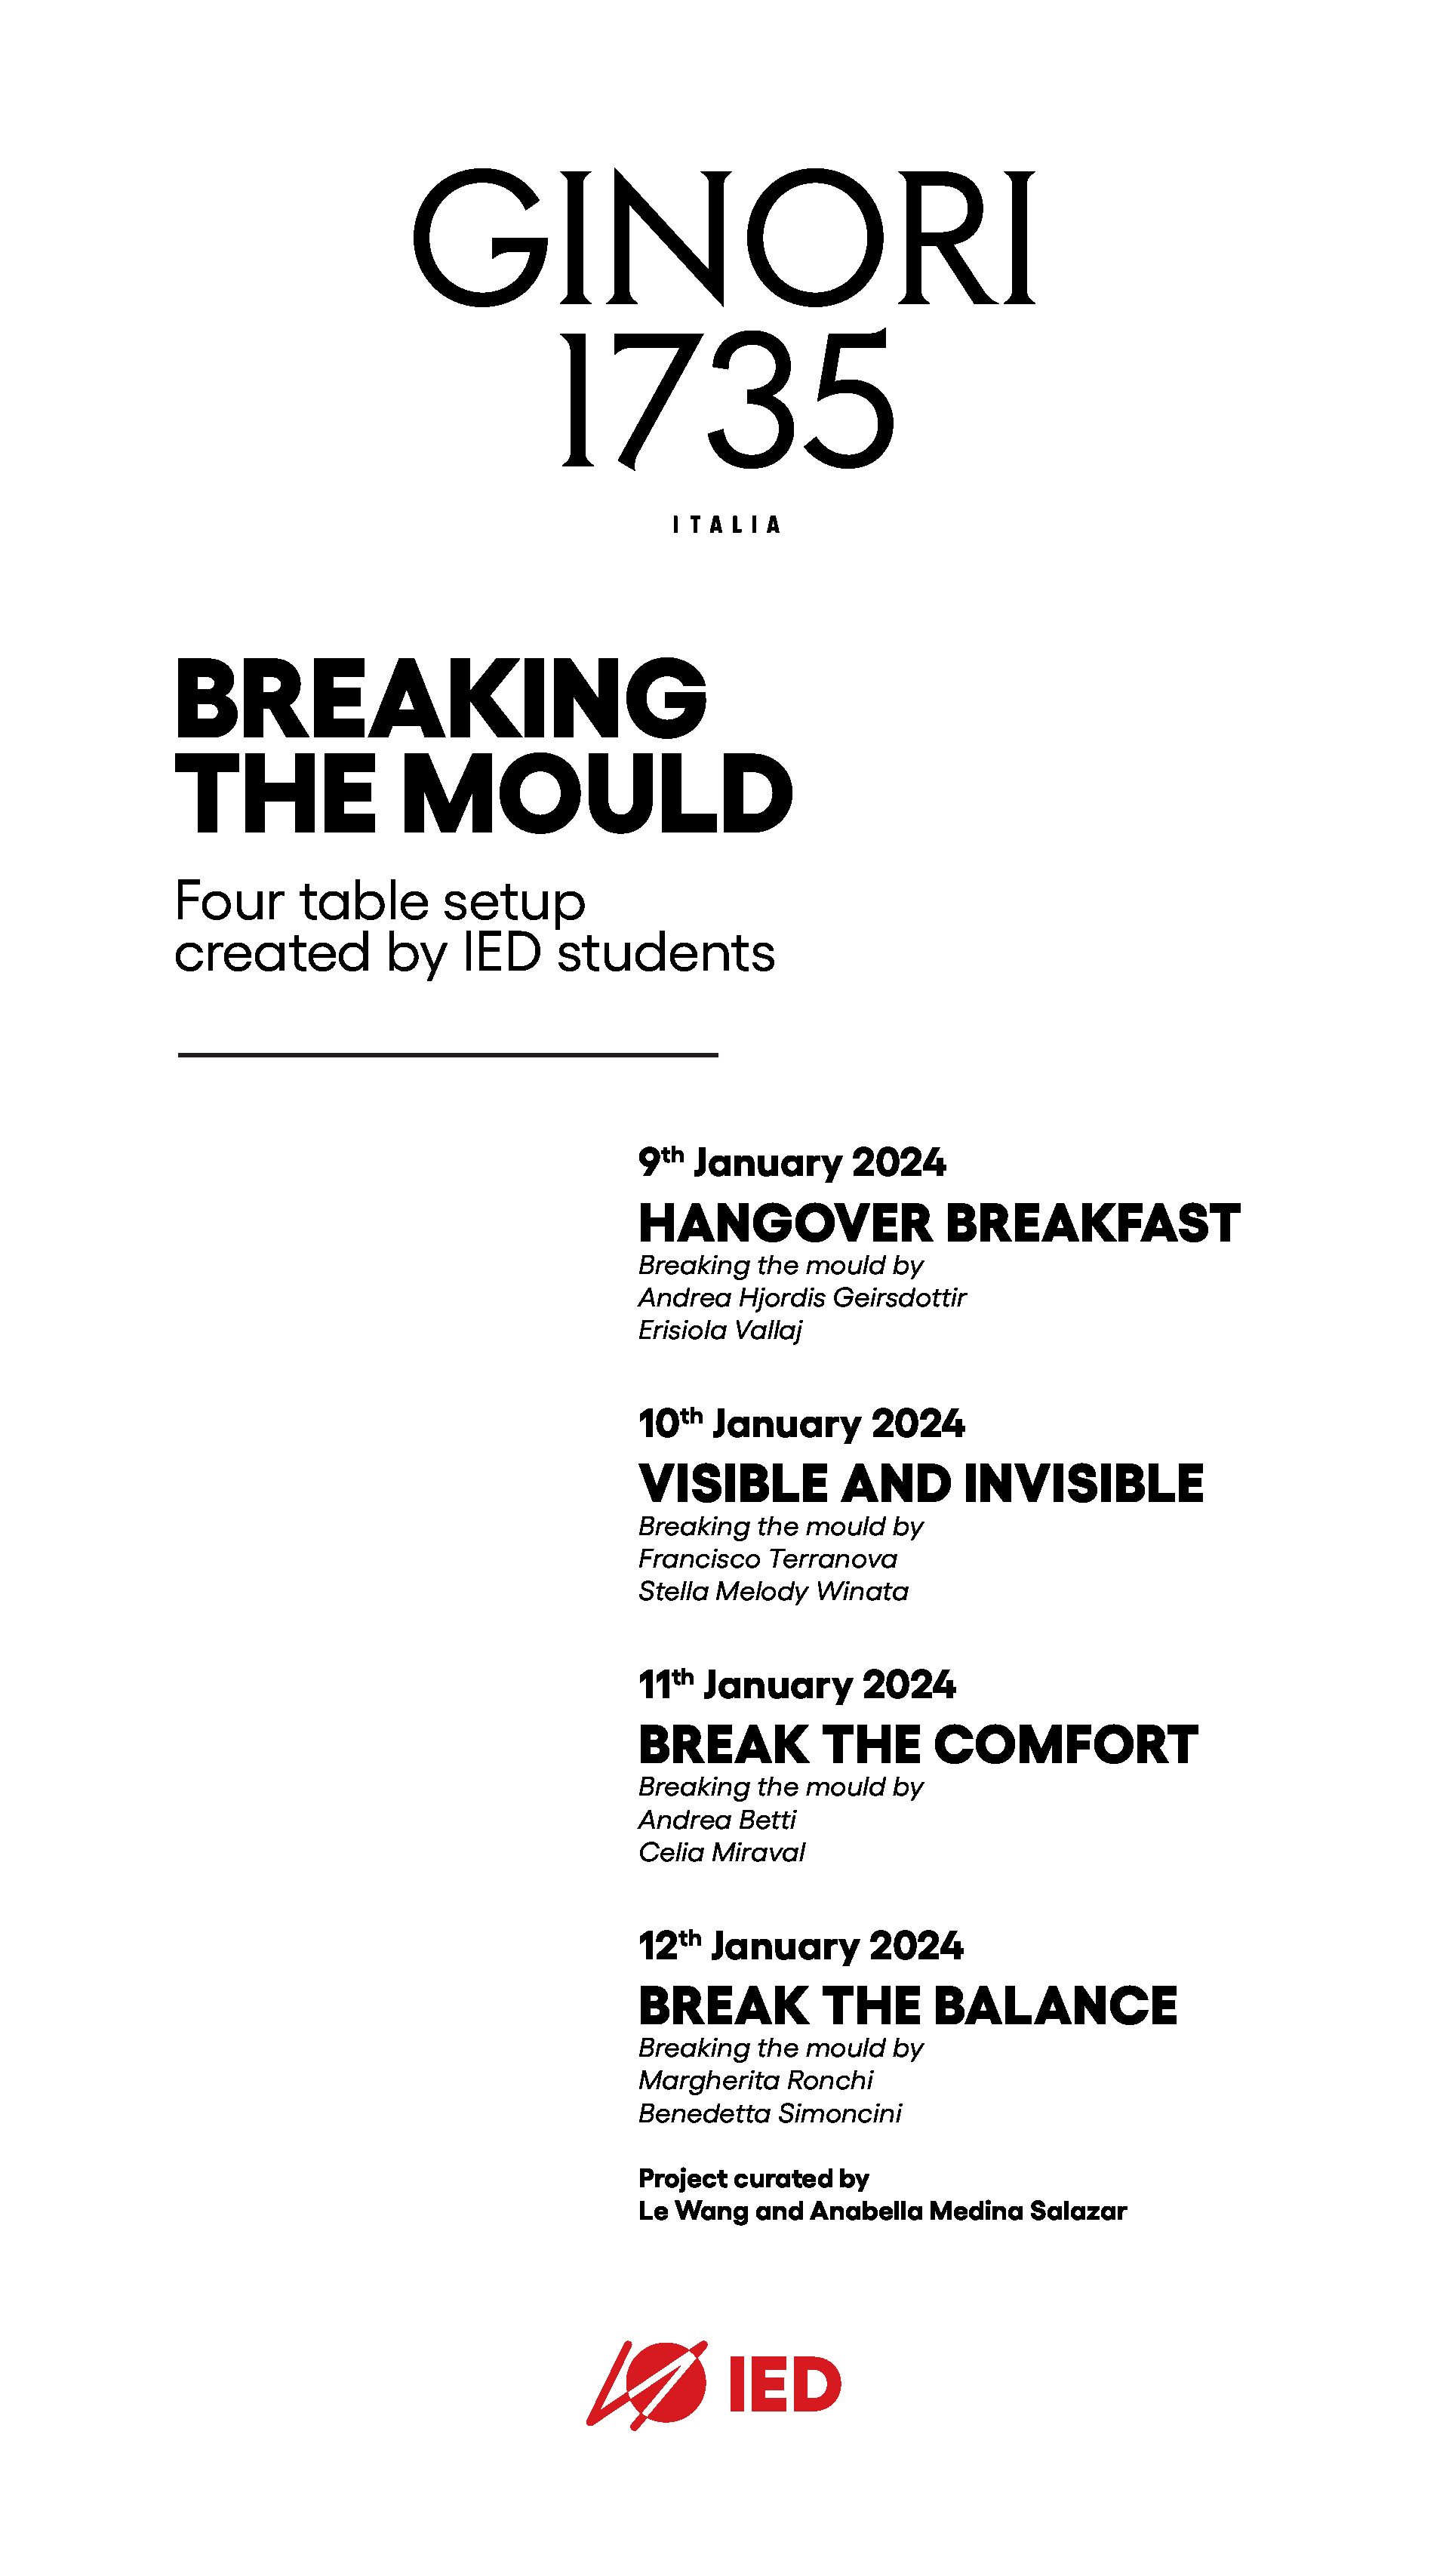 <strong>BREAKING THE MOULD</strong><strong>IL NUOVO PROGETTO CREATIVO A CURA DI GINORI 1735 E IED FIRENZE<br> </strong>